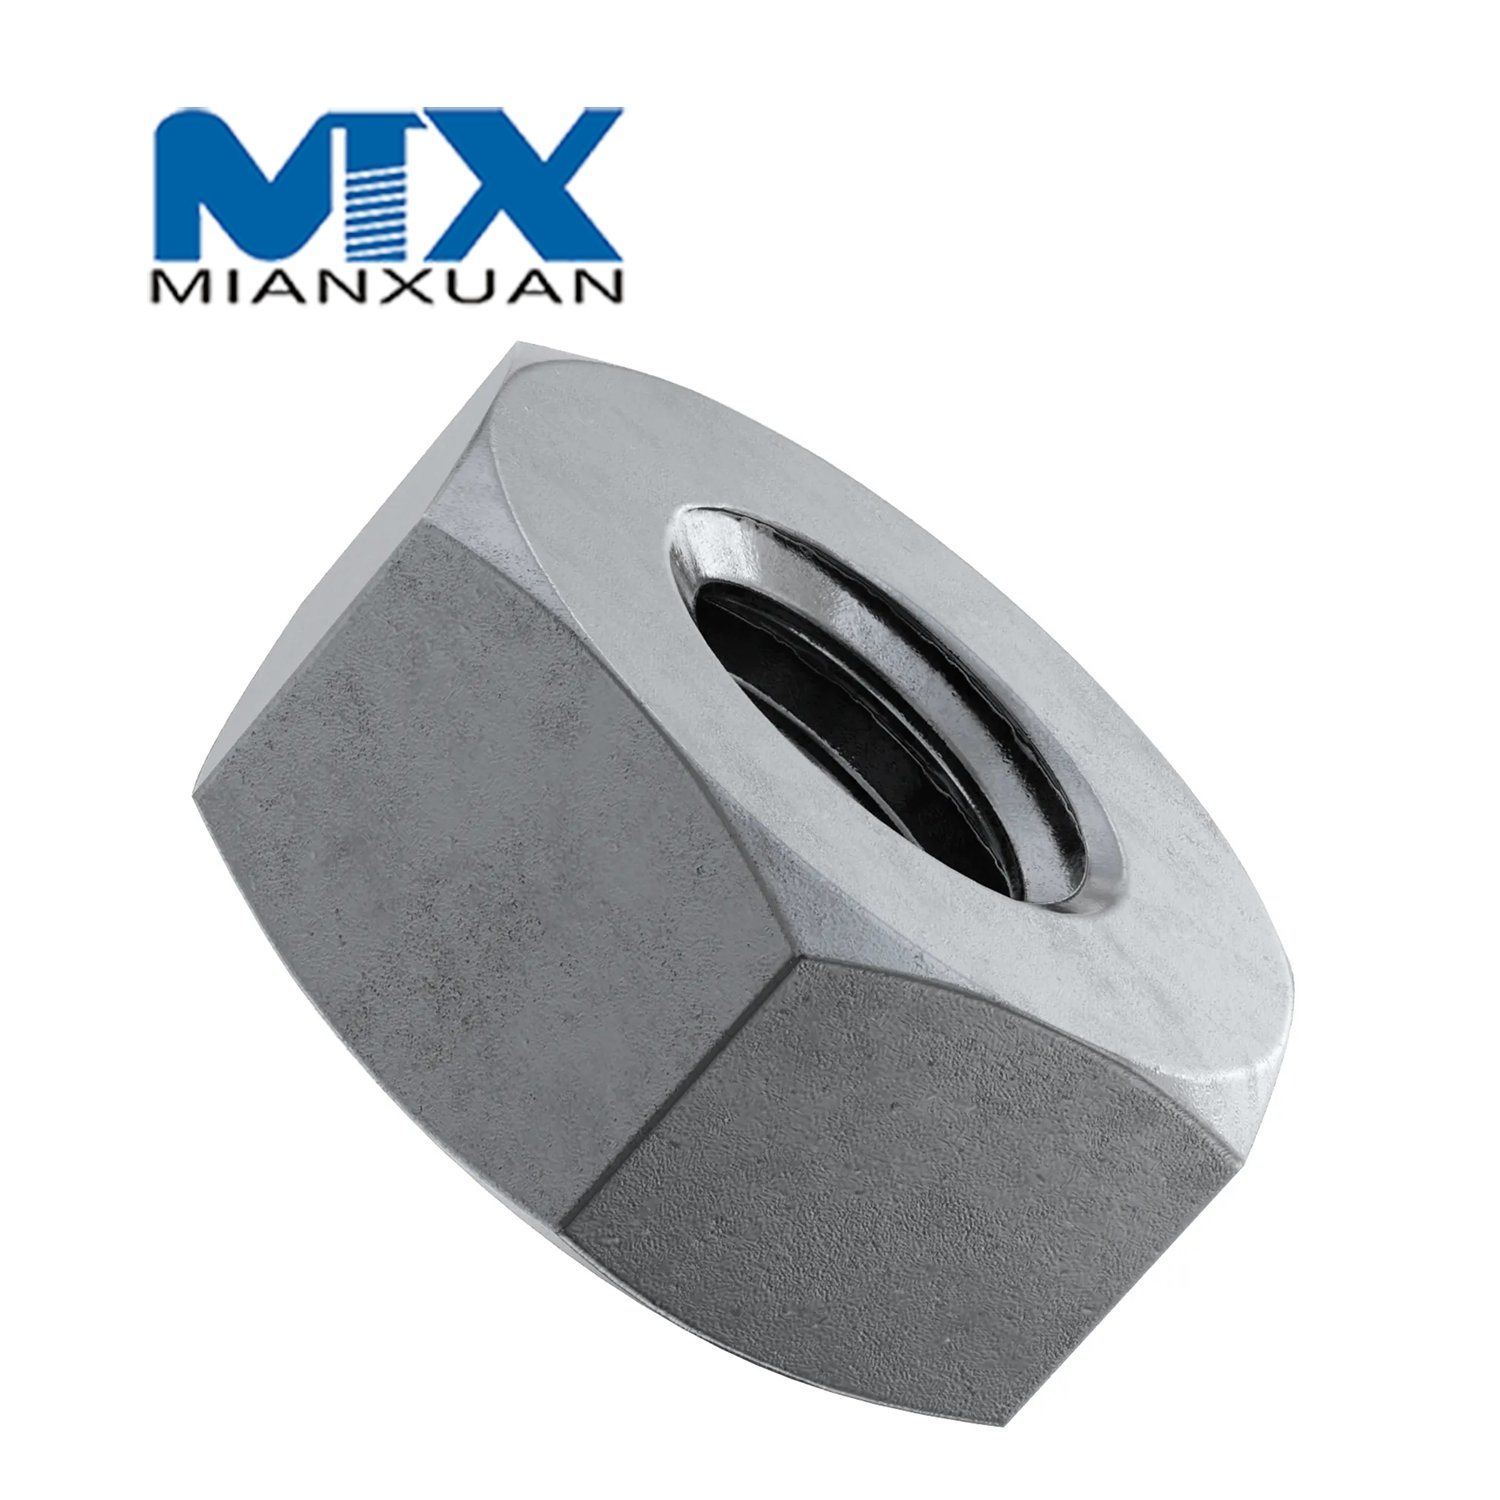 Stainless A2 A4 304 316 A2-70 A2-80 Hex Nut ISO4032 Hexagon Nut 4032 M10 M12 M14 M16 M20